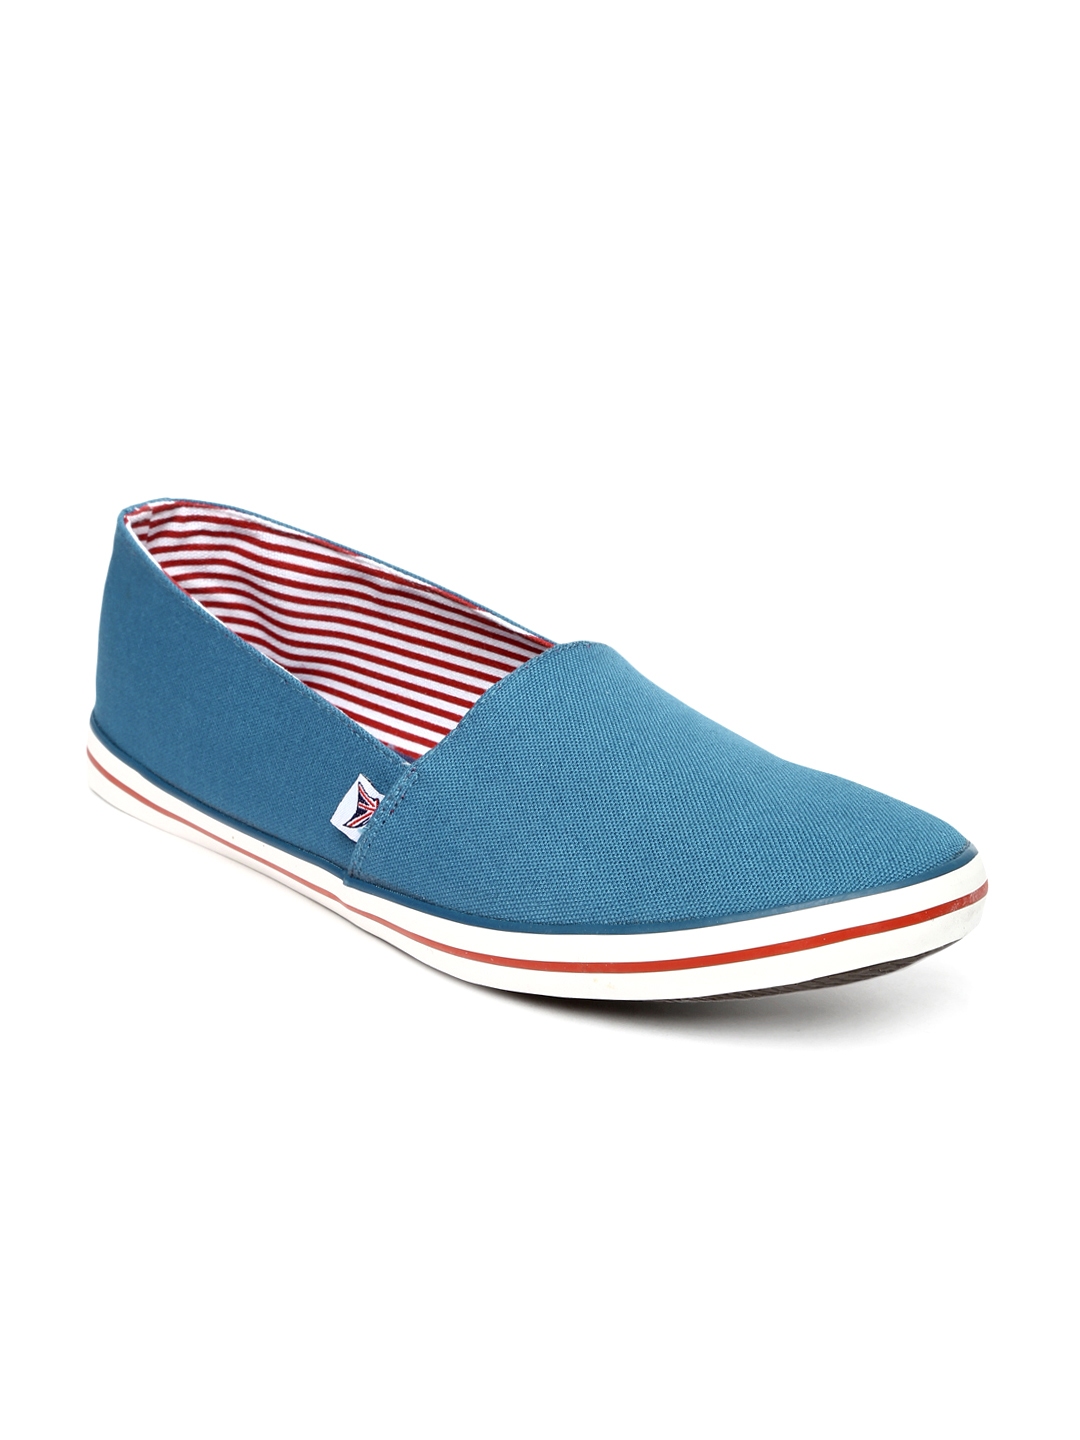 Buy Mast & Harbour Men Teal Blue Casual Shoes - Casual Shoes for Men ...